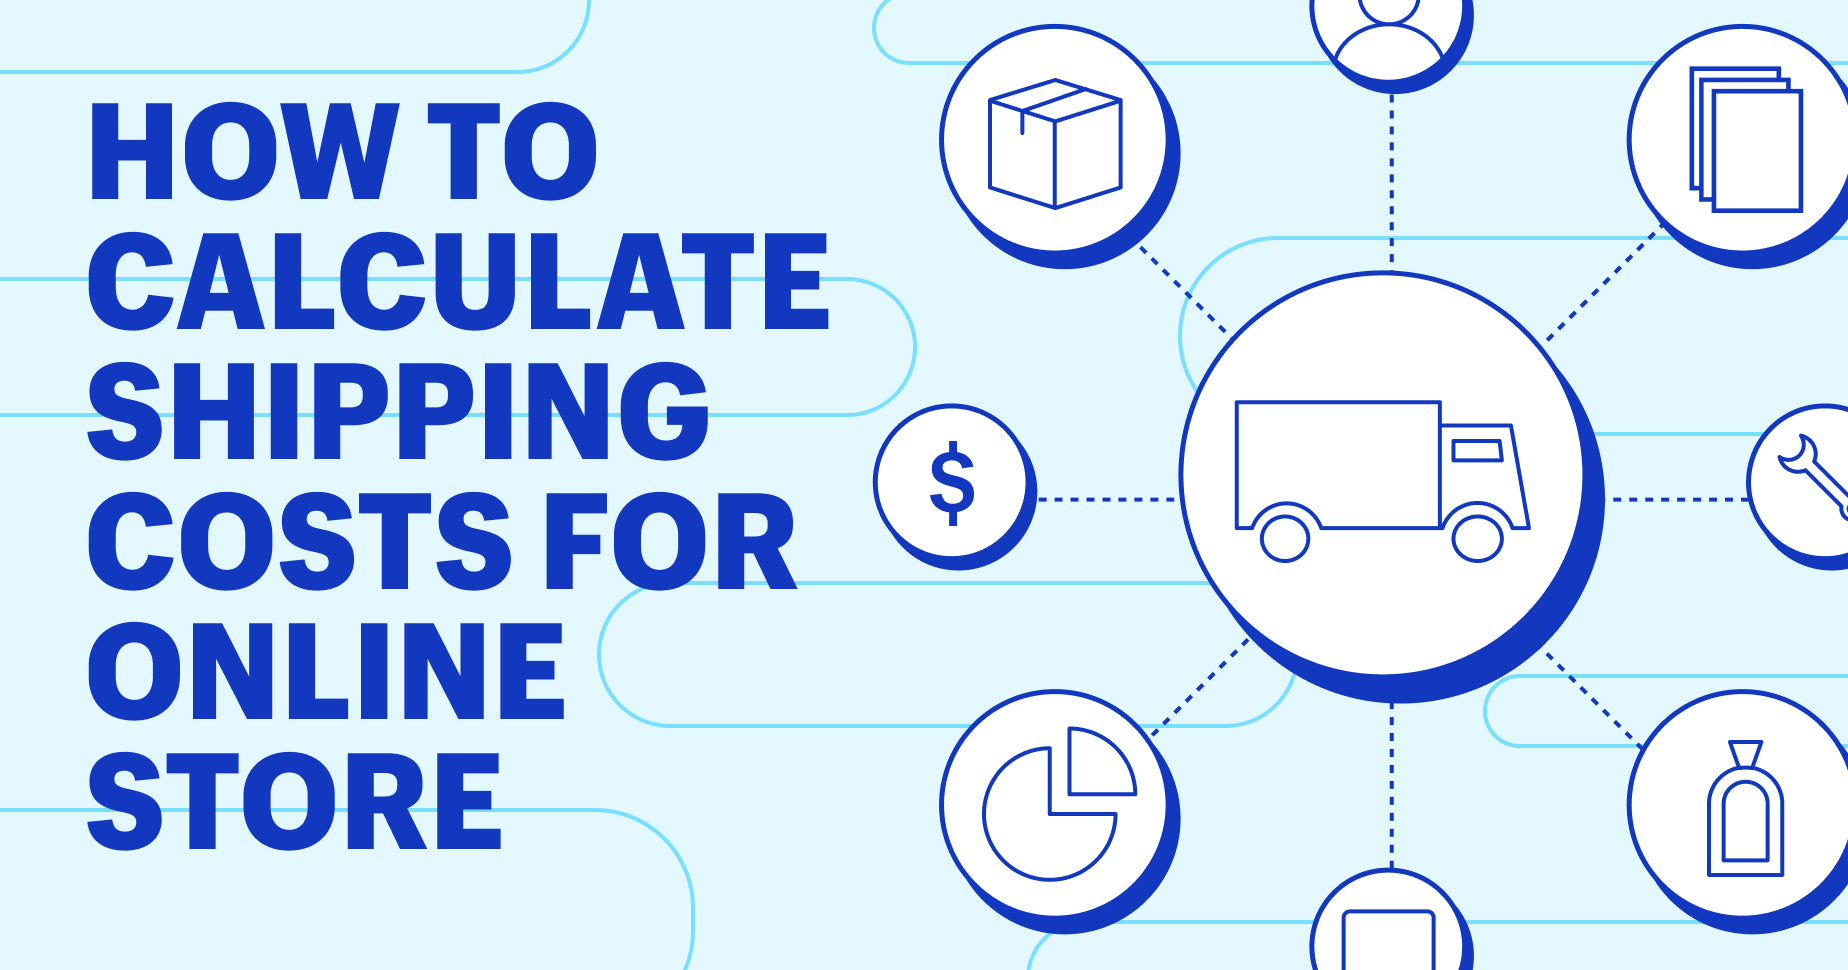 https://cdn.shopify.com/s/files/1/0070/7032/files/how-to-calculate-shipping-costs-for-online-store.jpg?v=1664564003